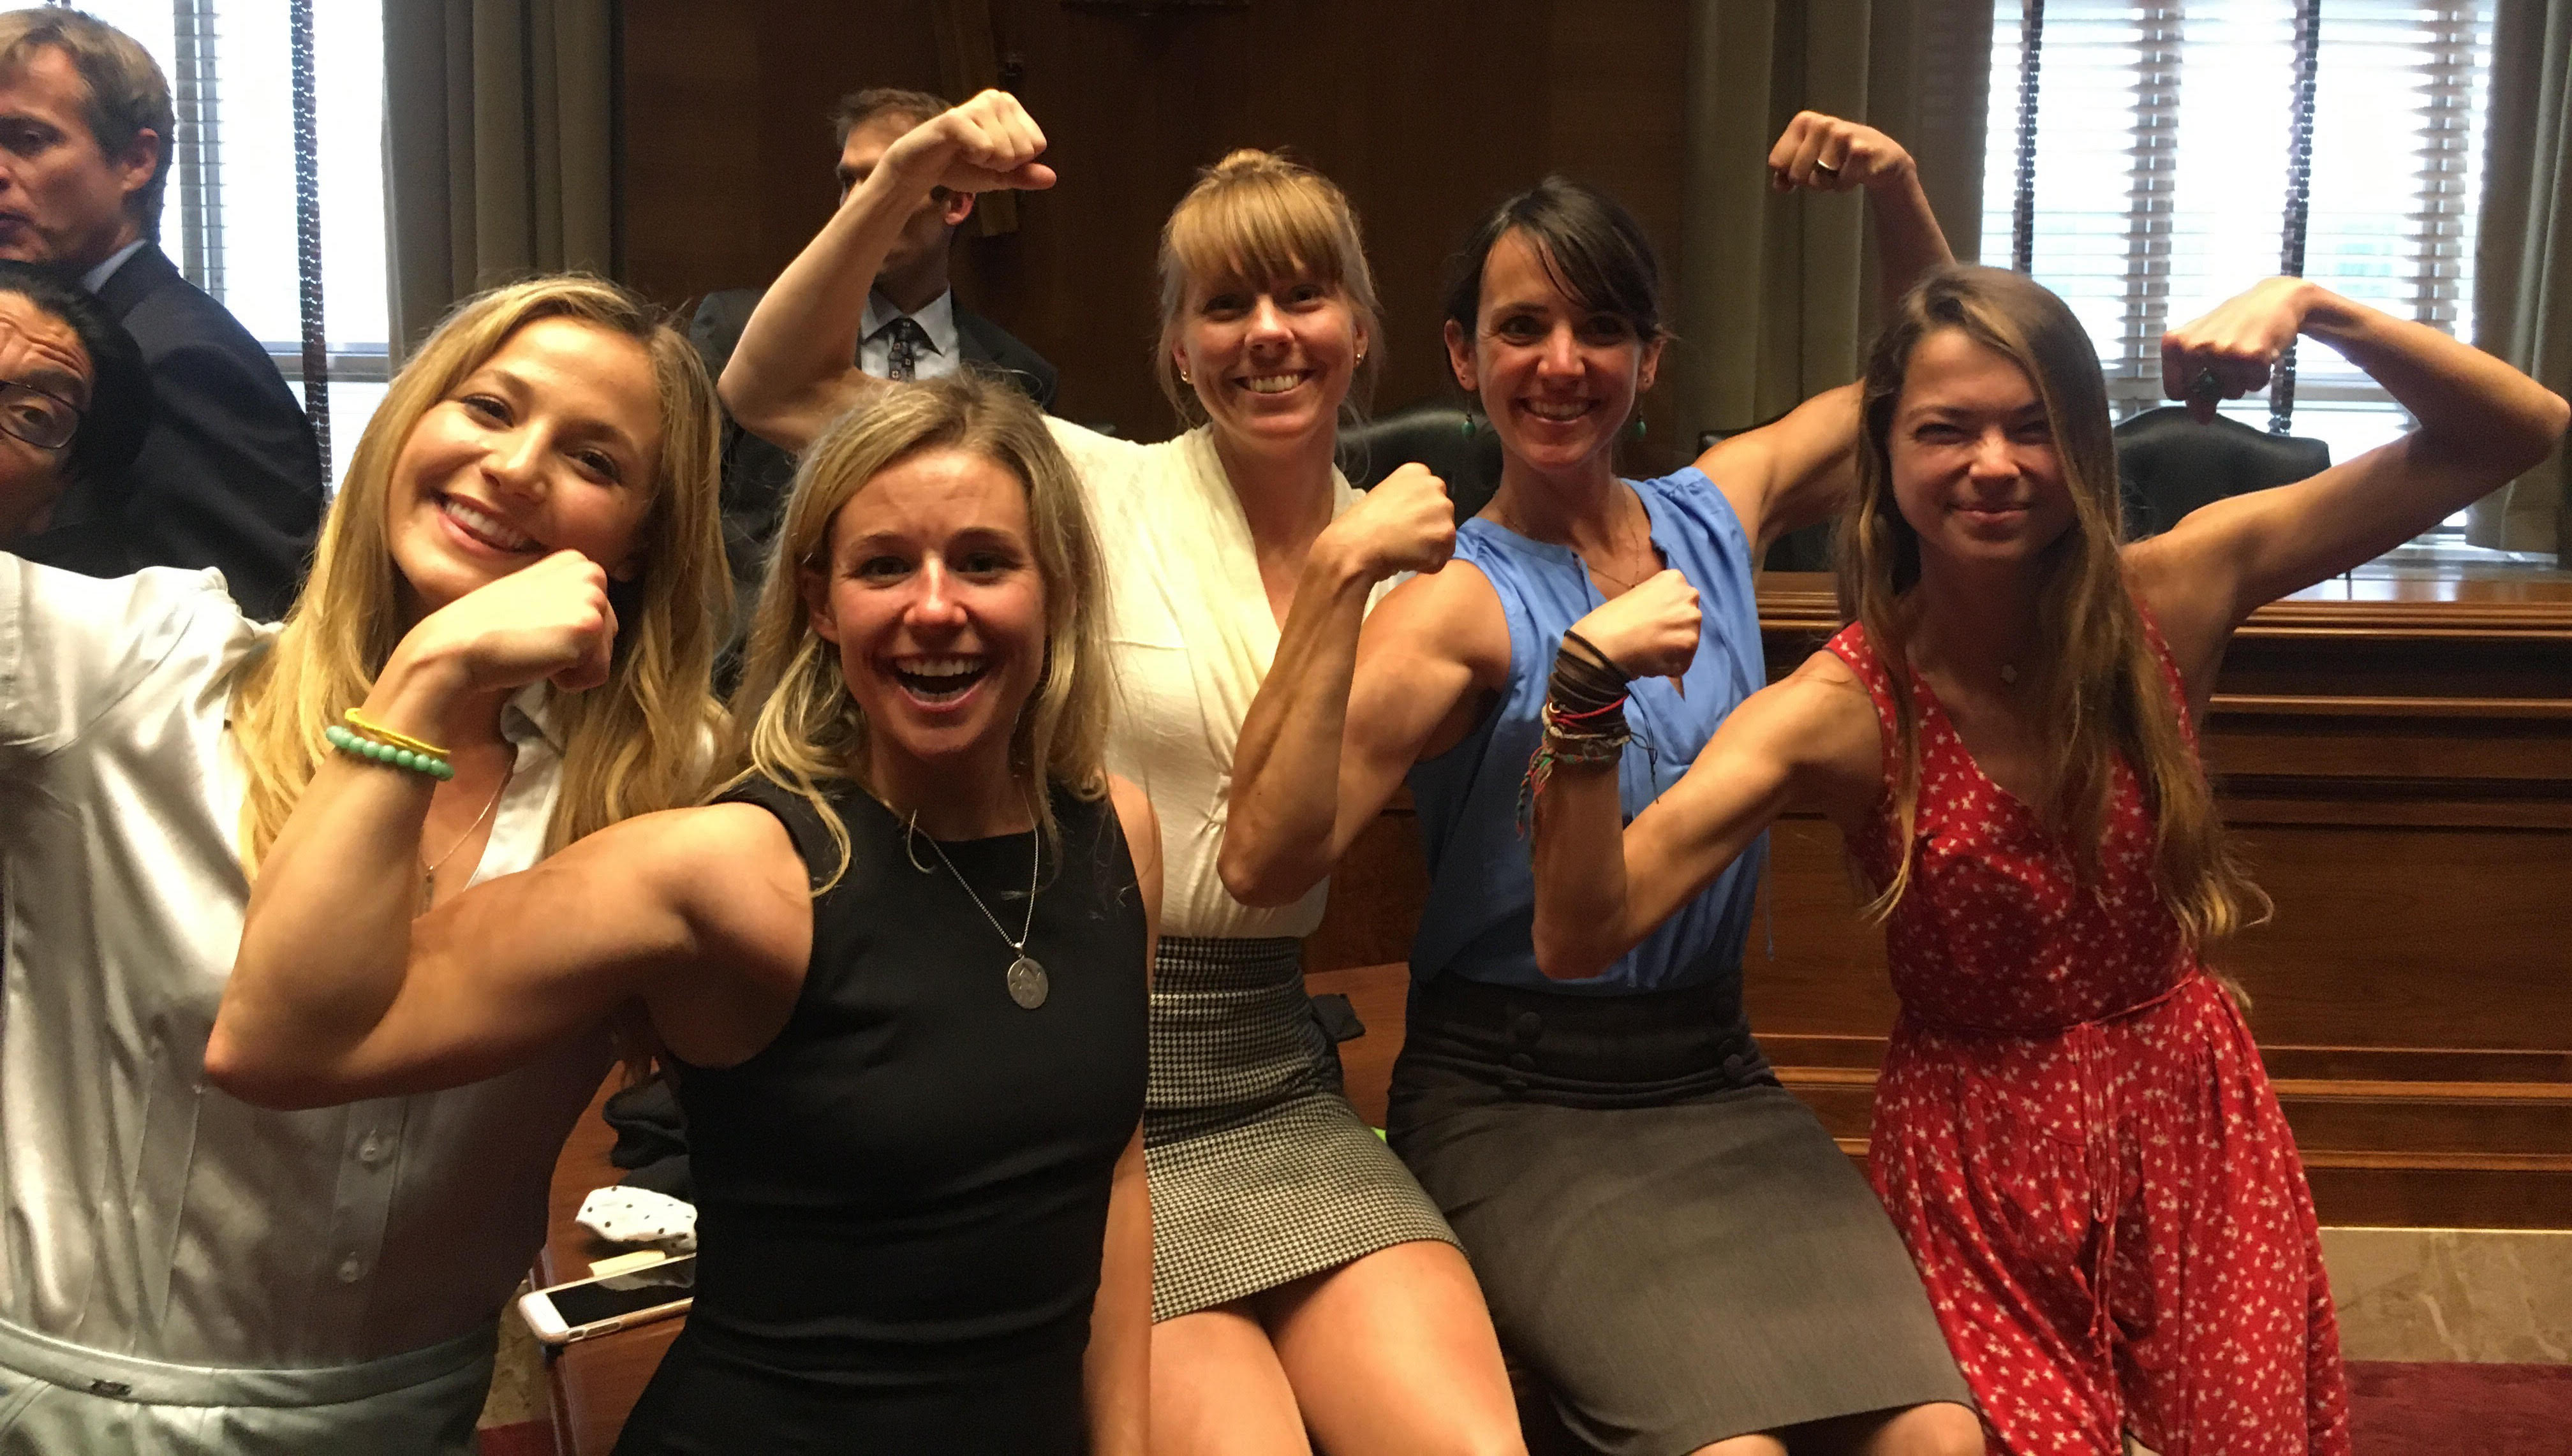 Flashback from 2017: (left to right) Sasha DiGiulian, Caroline Gleich, Libby Sauter, Quinn Brett and Katie Boue flex after a Congressional briefing in the U.S. Senate last year. All of them returned to Washington, D.C., this week for the third annual Climb the Hill event. [Photo] Derek Franz